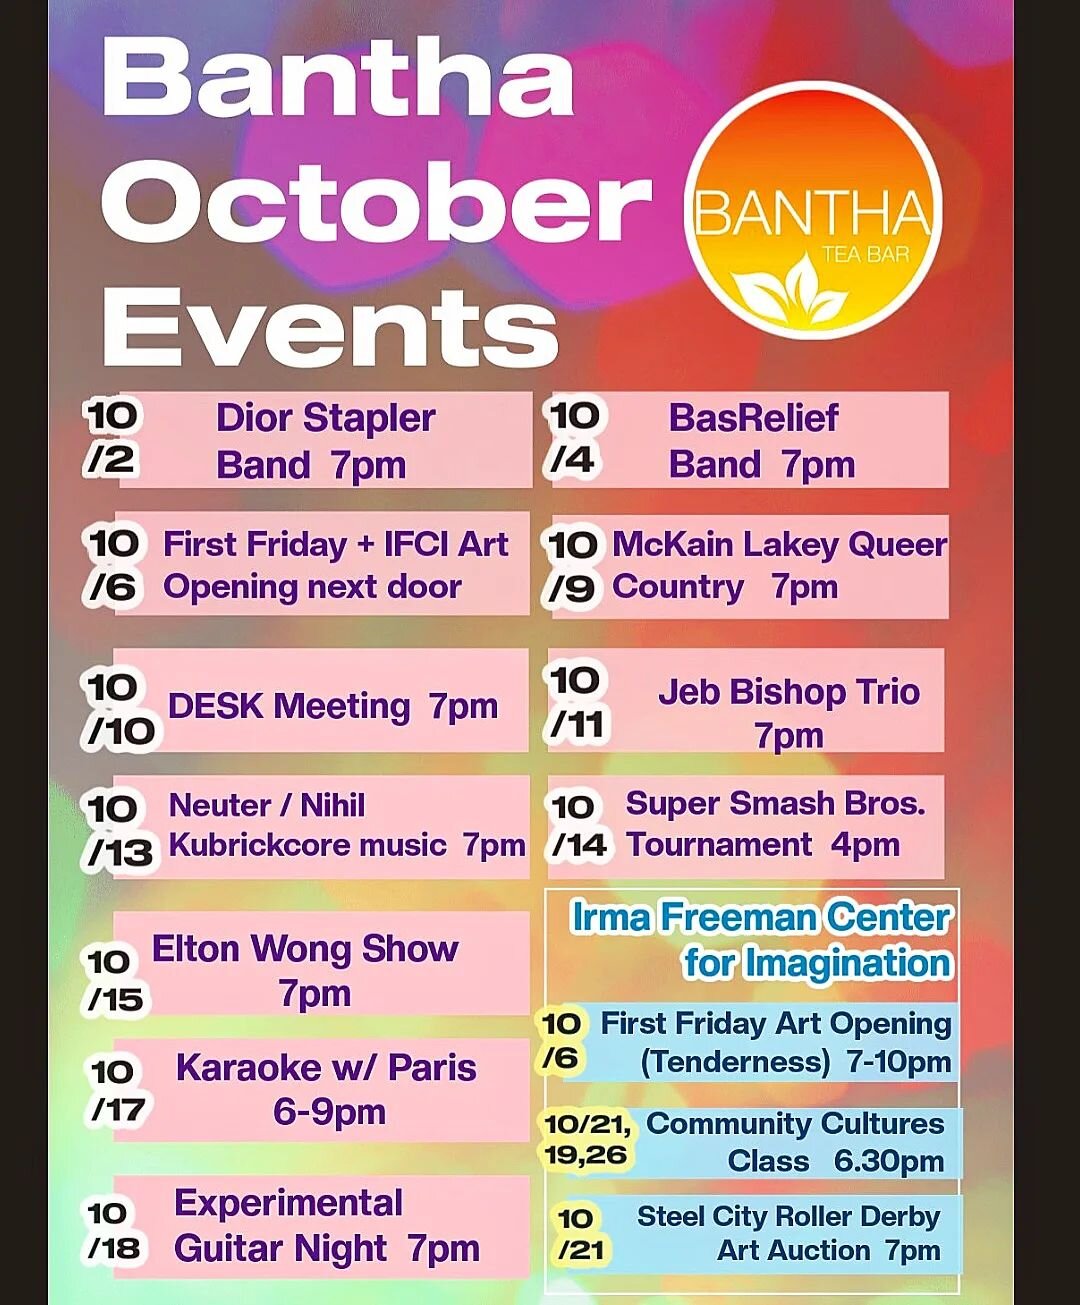 OCTOBER EVENTS AT BANTHA! 

#vegan #glutenfree #banthateabar #teabar #pghbusiness #pittsburghbusiness #shoplocal
#pghtea #pghcoffee #pittsburghcoffee #ecofriendly #reuseable #teasandtinctures #supportlocalbusiness
#supportlocalartists #drinkwellbewel